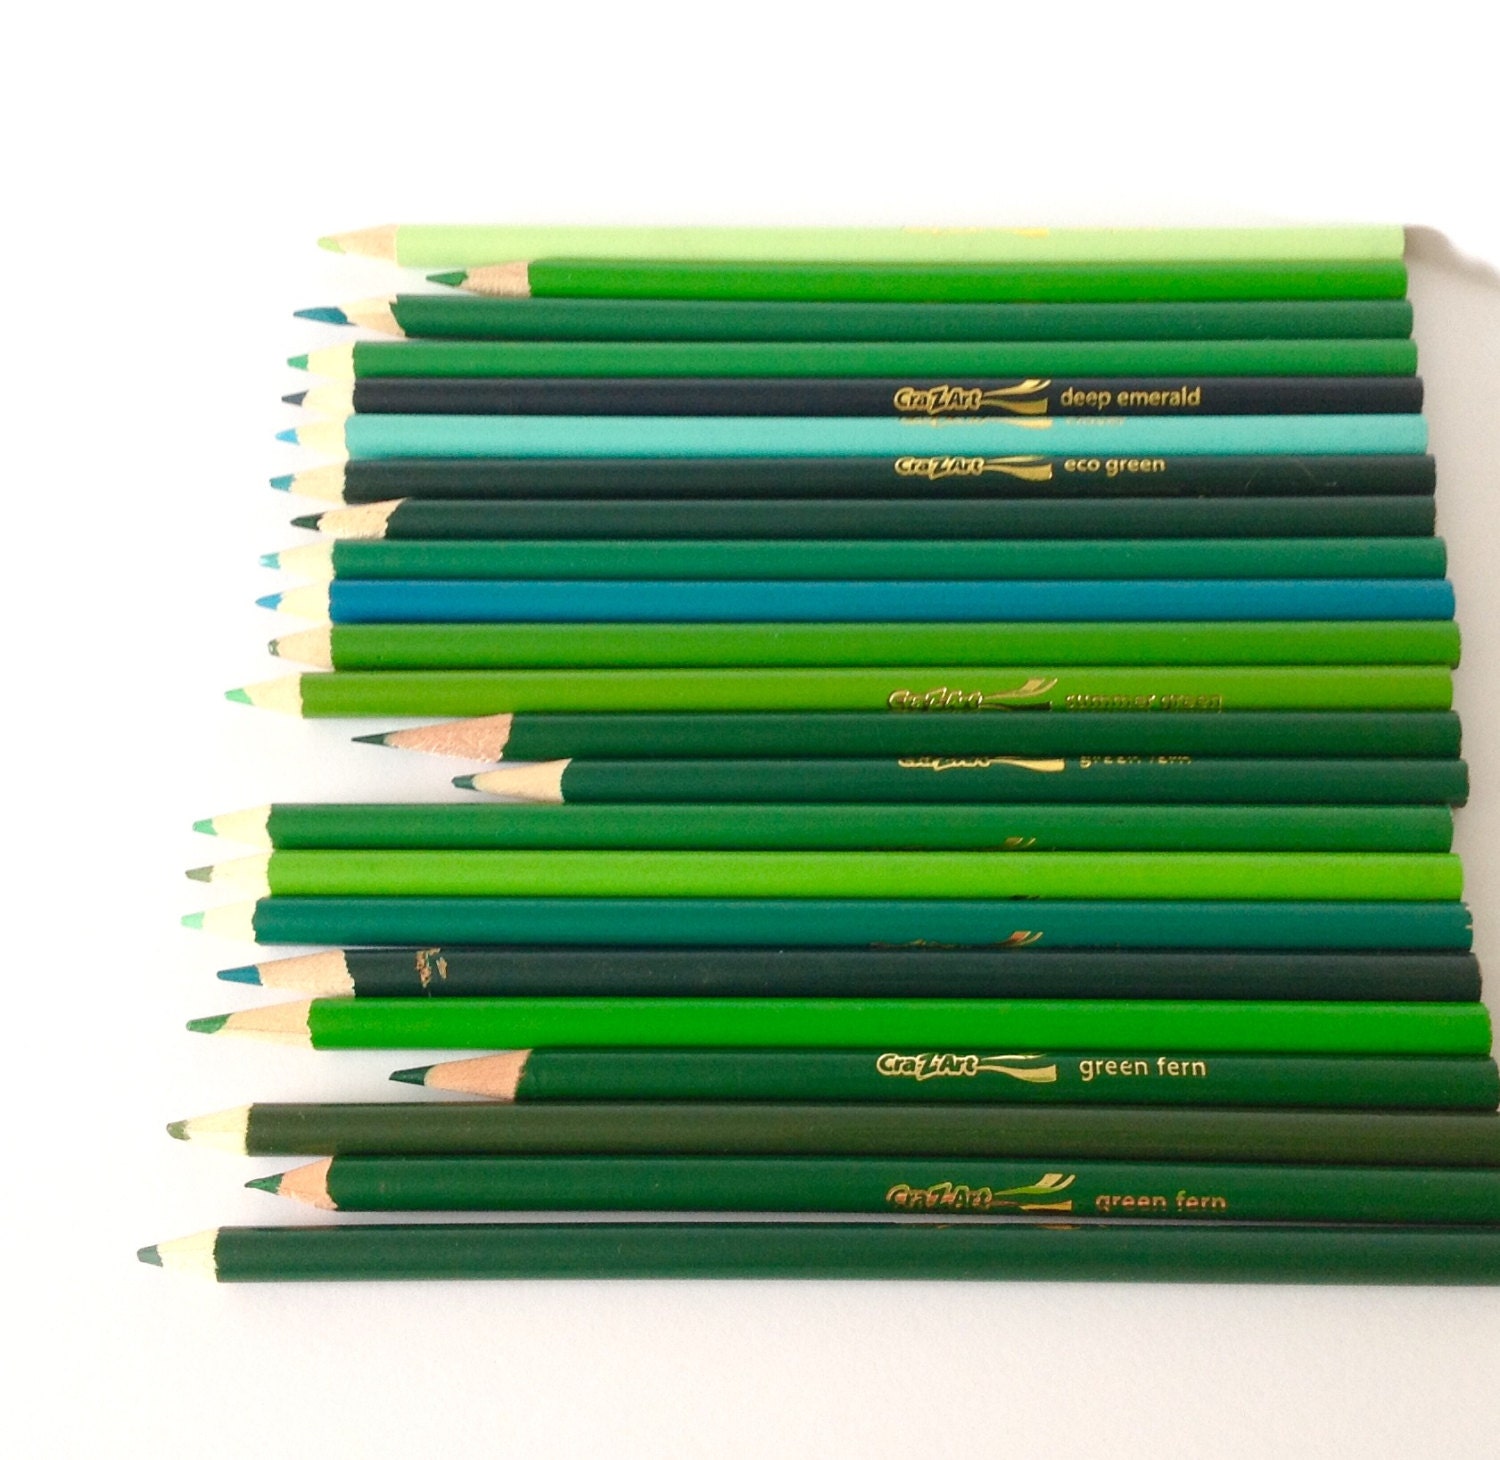 23 Green Colored Pencils Assortment by Cra-Z-Art Sharpened